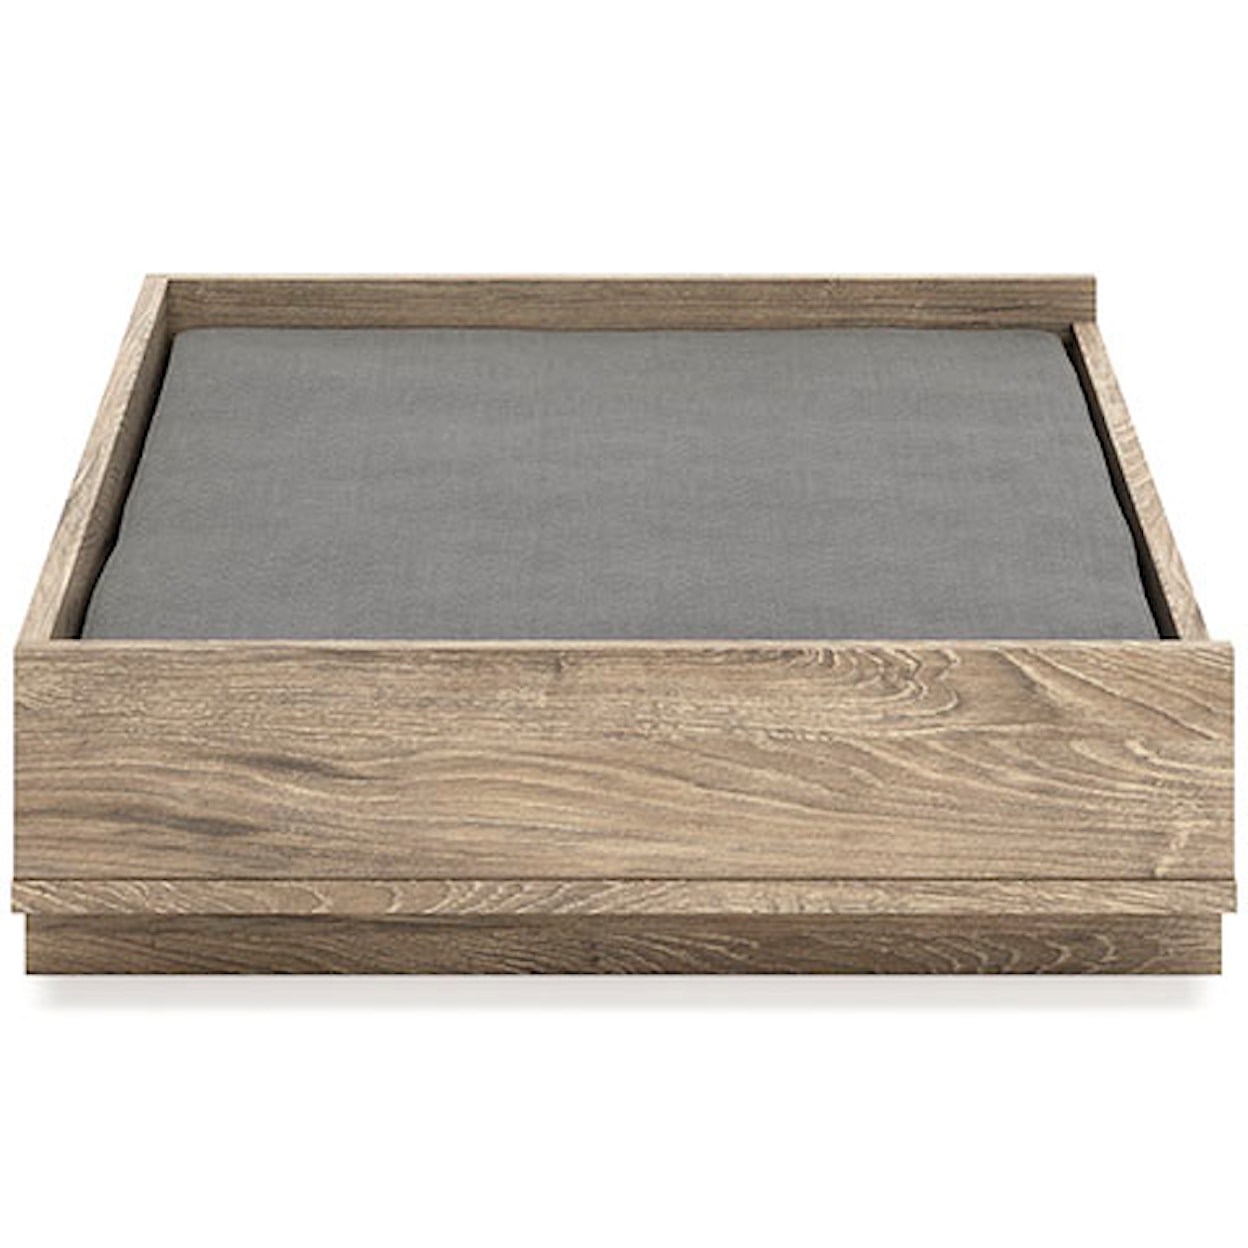 Signature Design by Ashley Furniture Oliah Pet Bed Frame